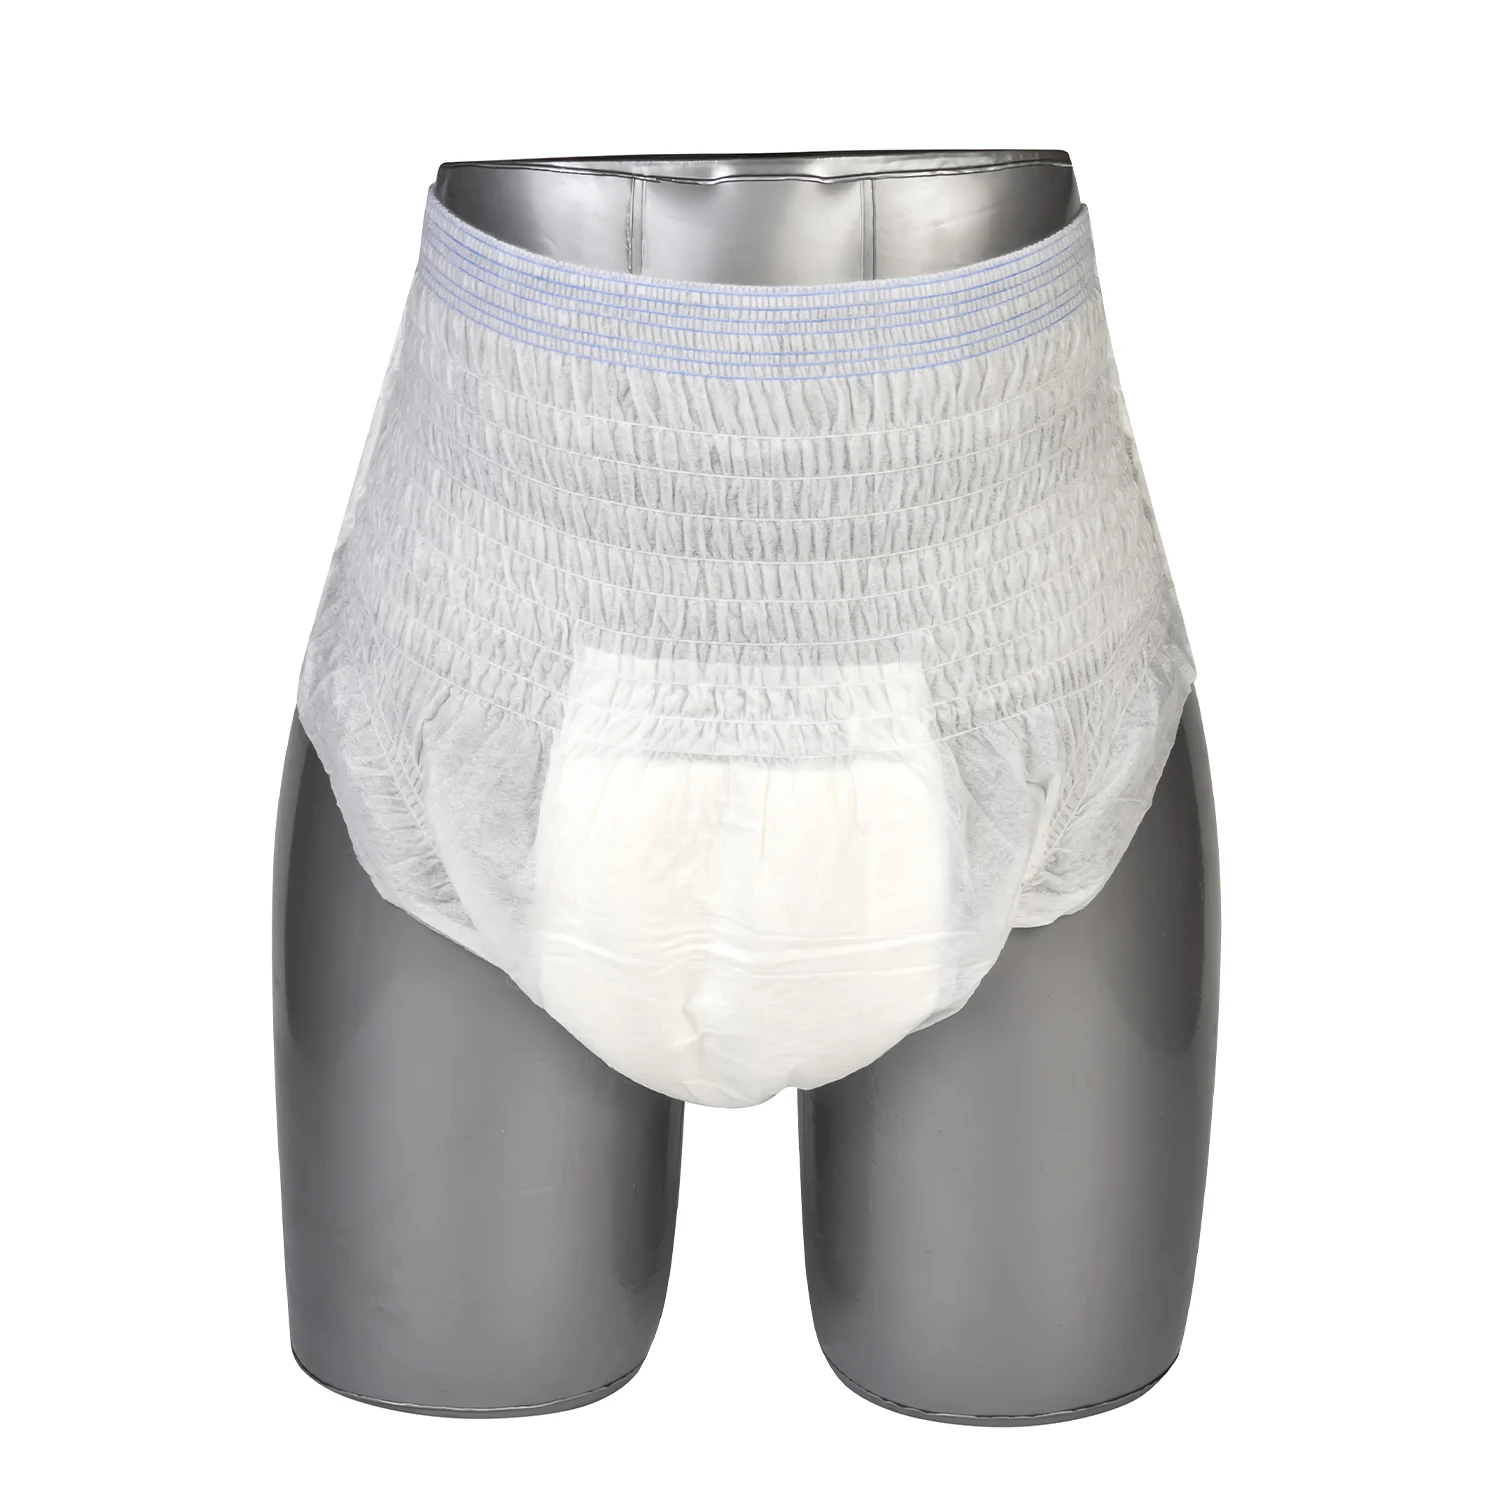 wholesale adult incontinence underwear overnight adult